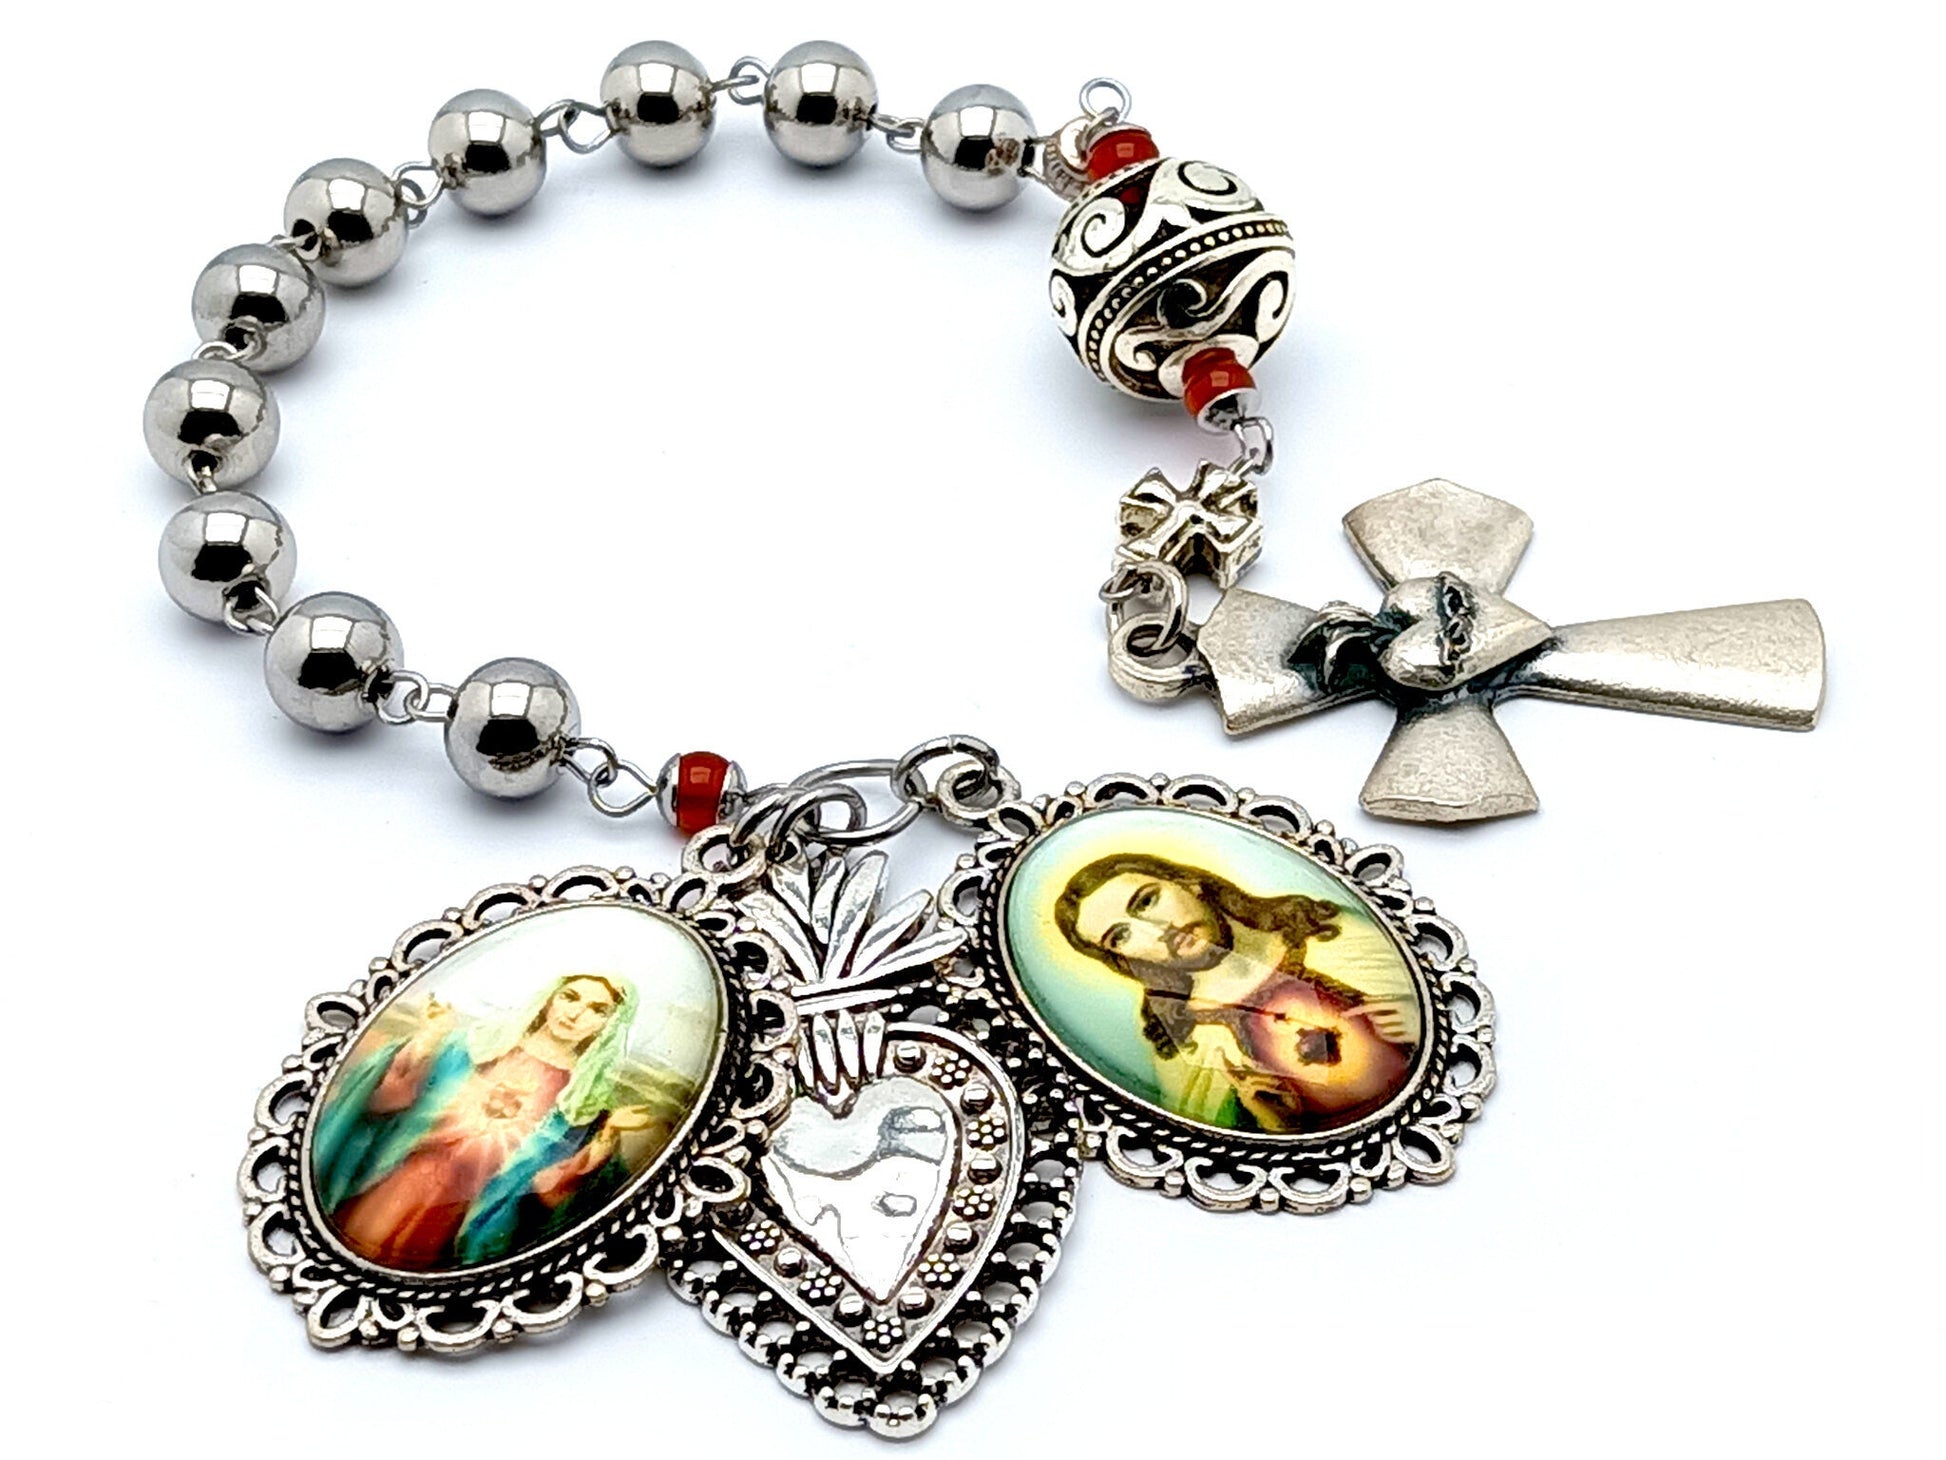 Sacred Heart of Jesus and Immaculate heart of Mary unique rosary beads single deacde rosary with stainless steel beads and Sacred Heart crucifix and medals.